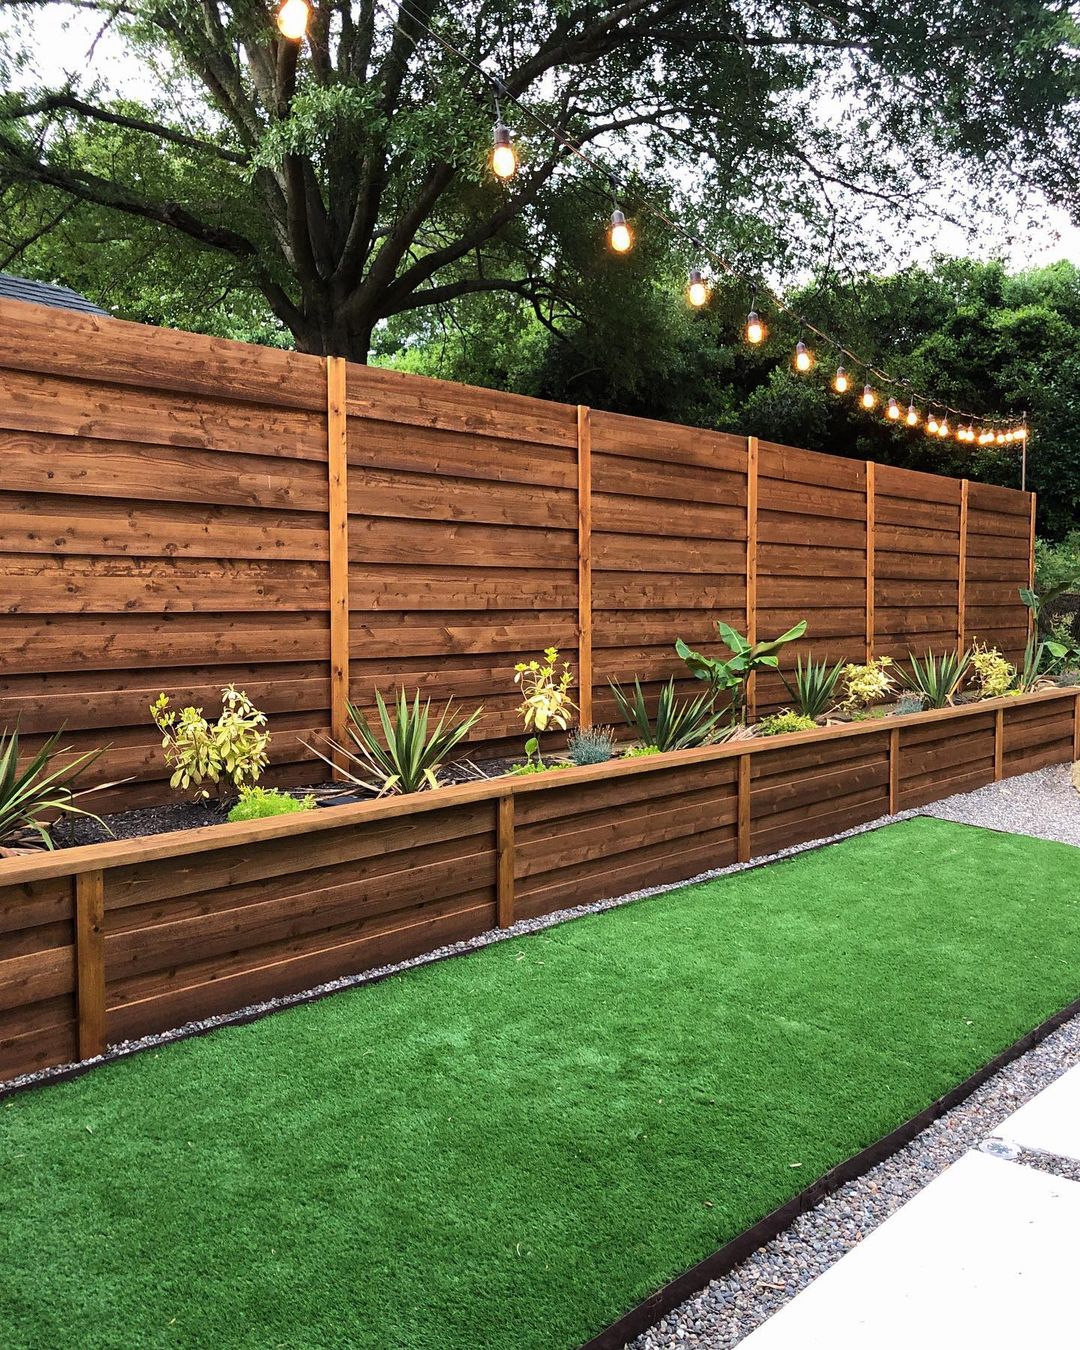 Modern backyard with built-in potted plants and an Edison light string. Photo by instagram user @flippinggvl